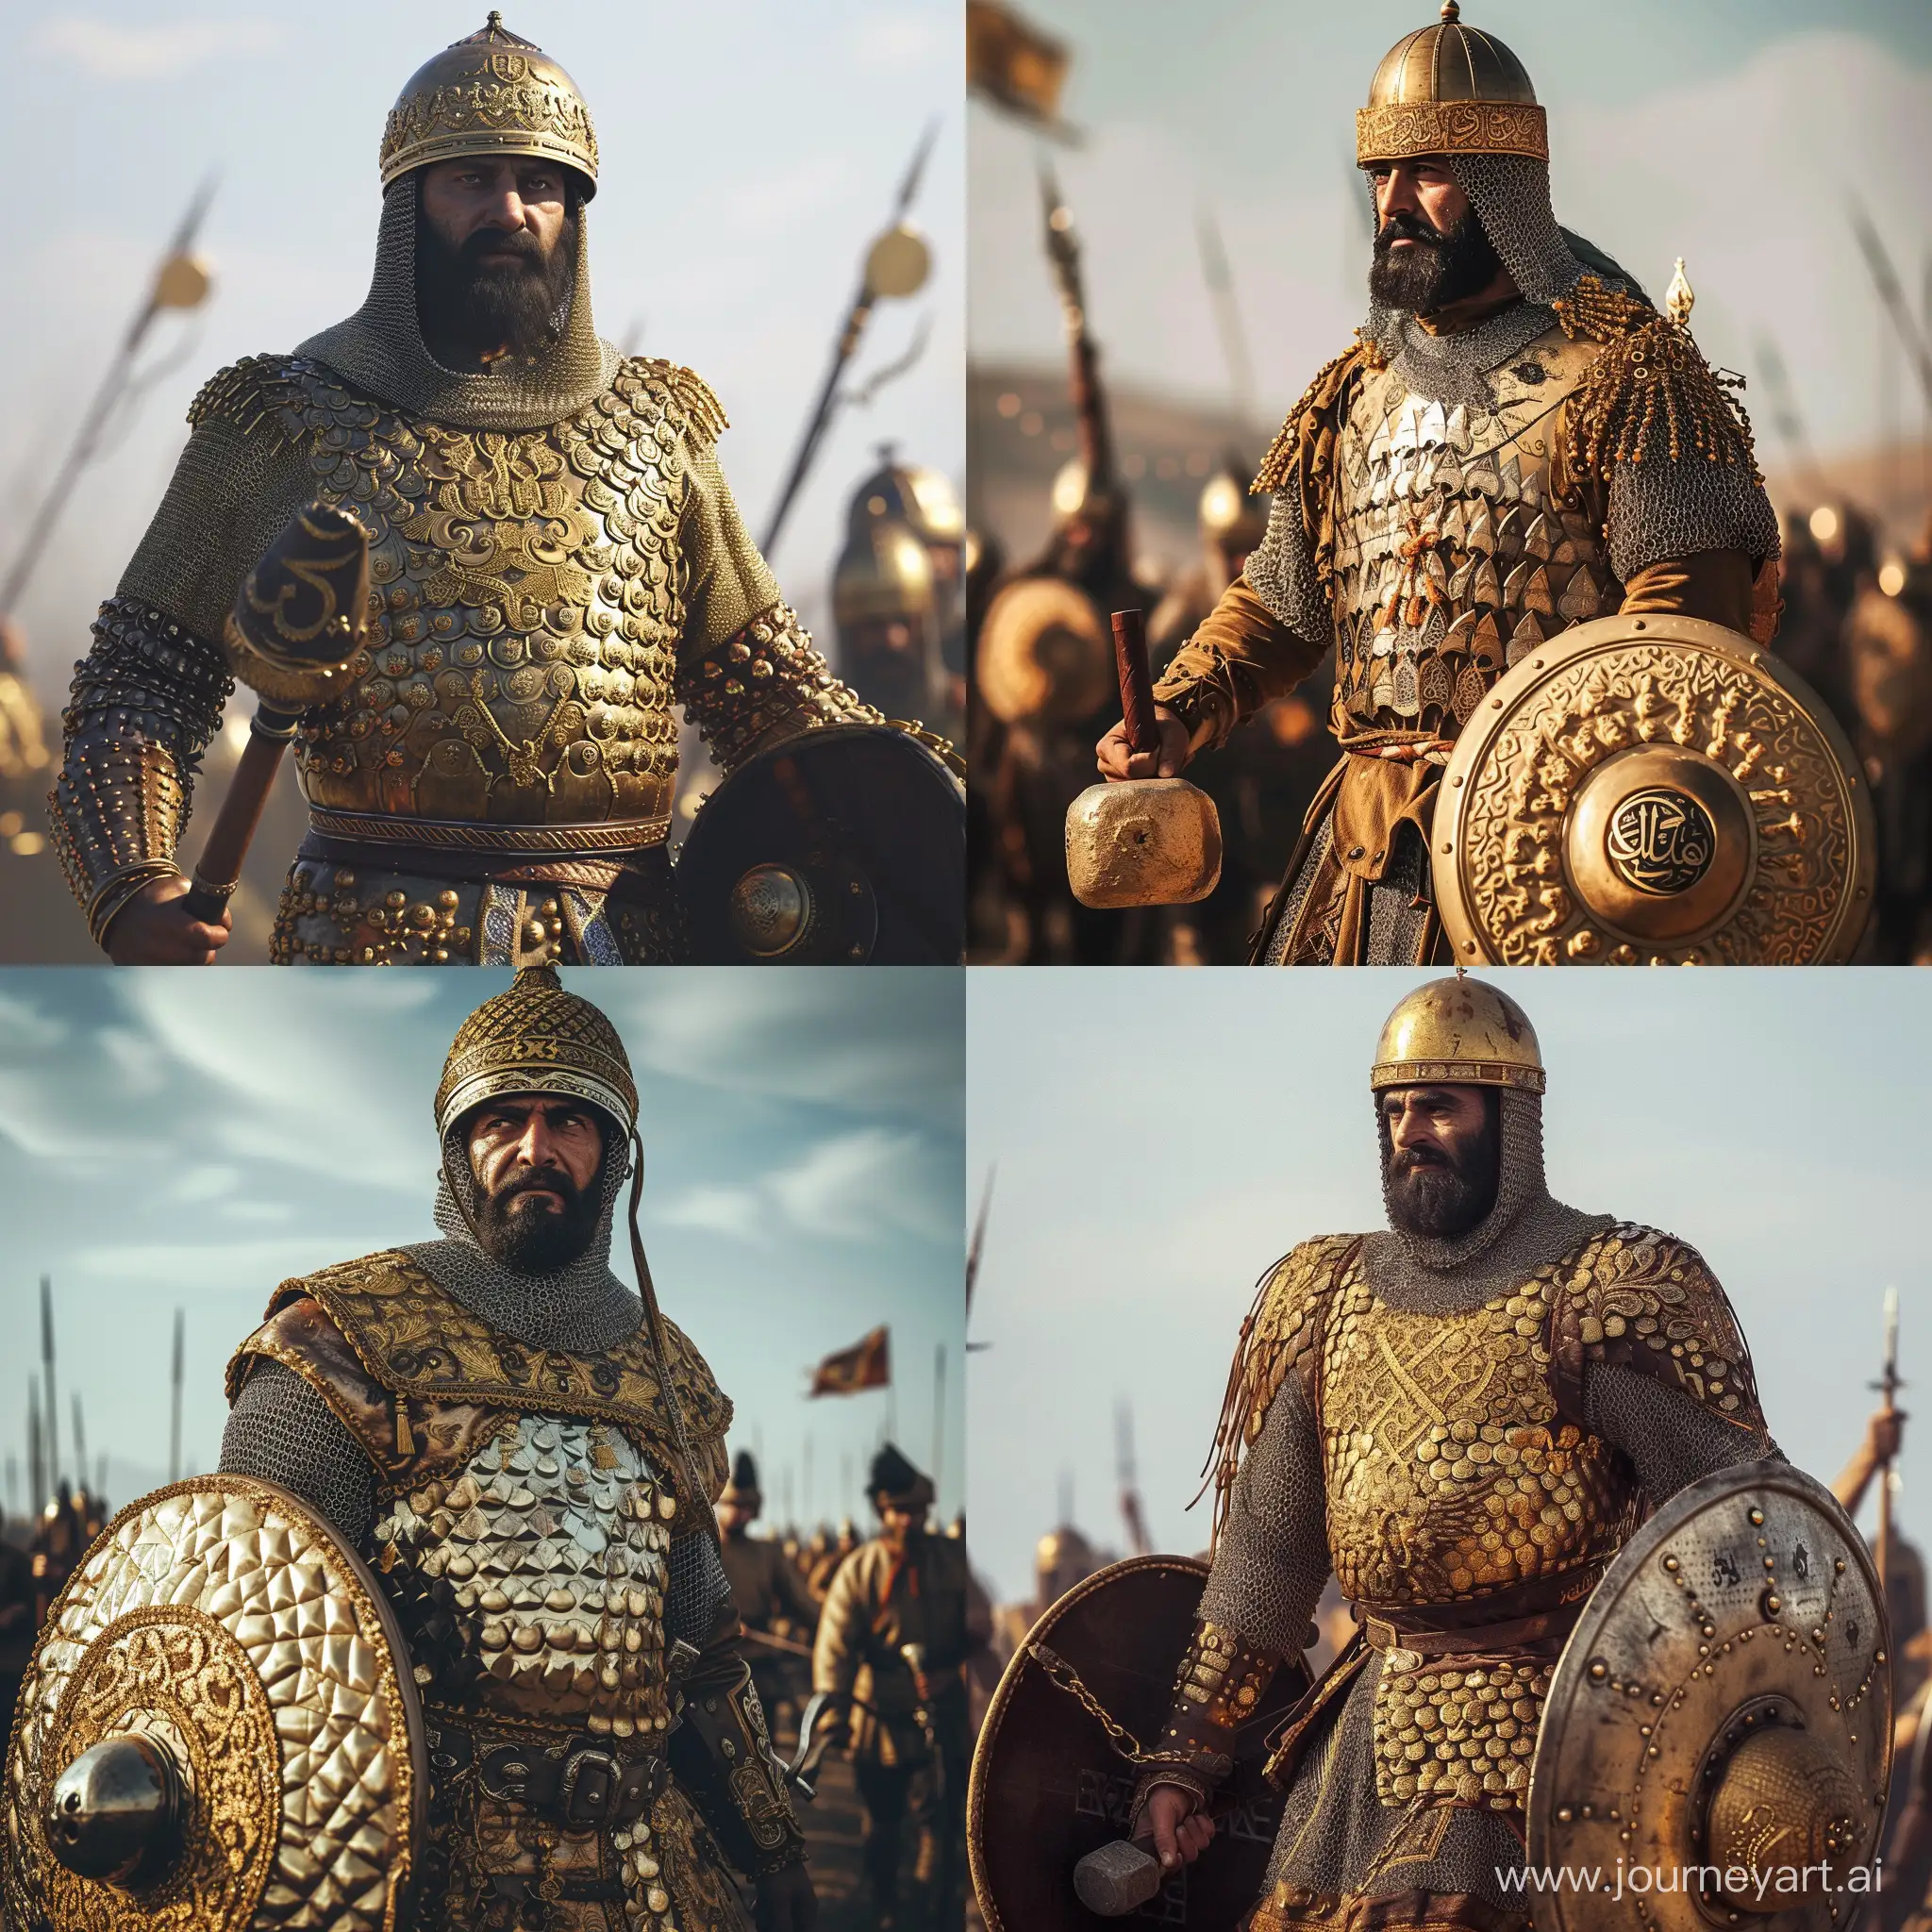 Ottoman Sultan Murad IV standing tall at battle field. He is wearing gold embroidered chain mail and Islamic Ottoman helmet. He seems brave and bold. He is equipping his famous legendary mace and rounded Ottoman Shield. Realistic image.